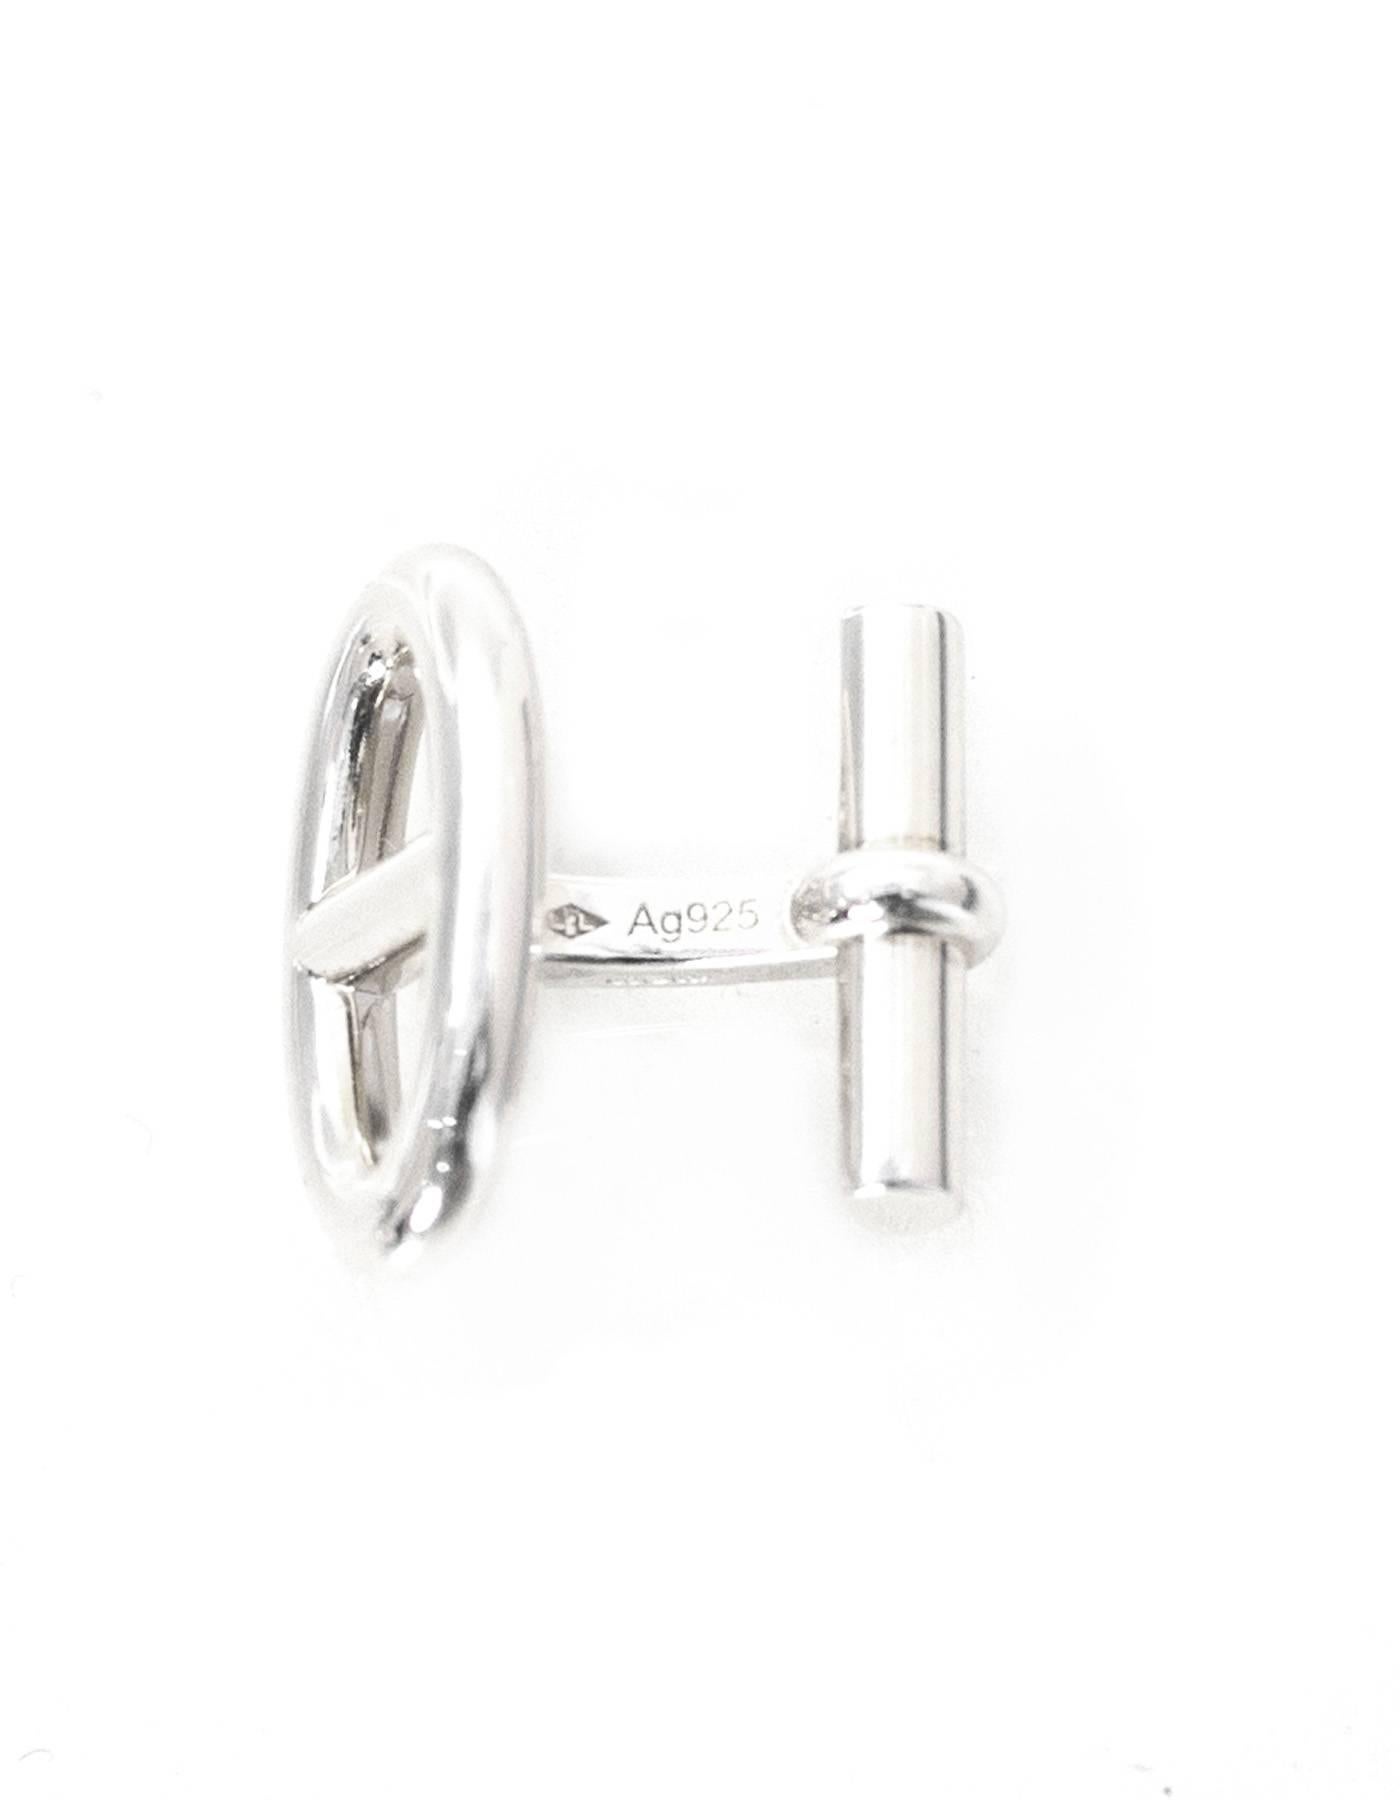 100% Authentic Hermes Marine Silver Cufflinks. Features sterling silver in an oval nautical shape. Comes with original box and bag. Excellent pre-owned condition.

Color: Silver
Materials: Sterling silver
Closure: None
Stamp: Hermes AG925